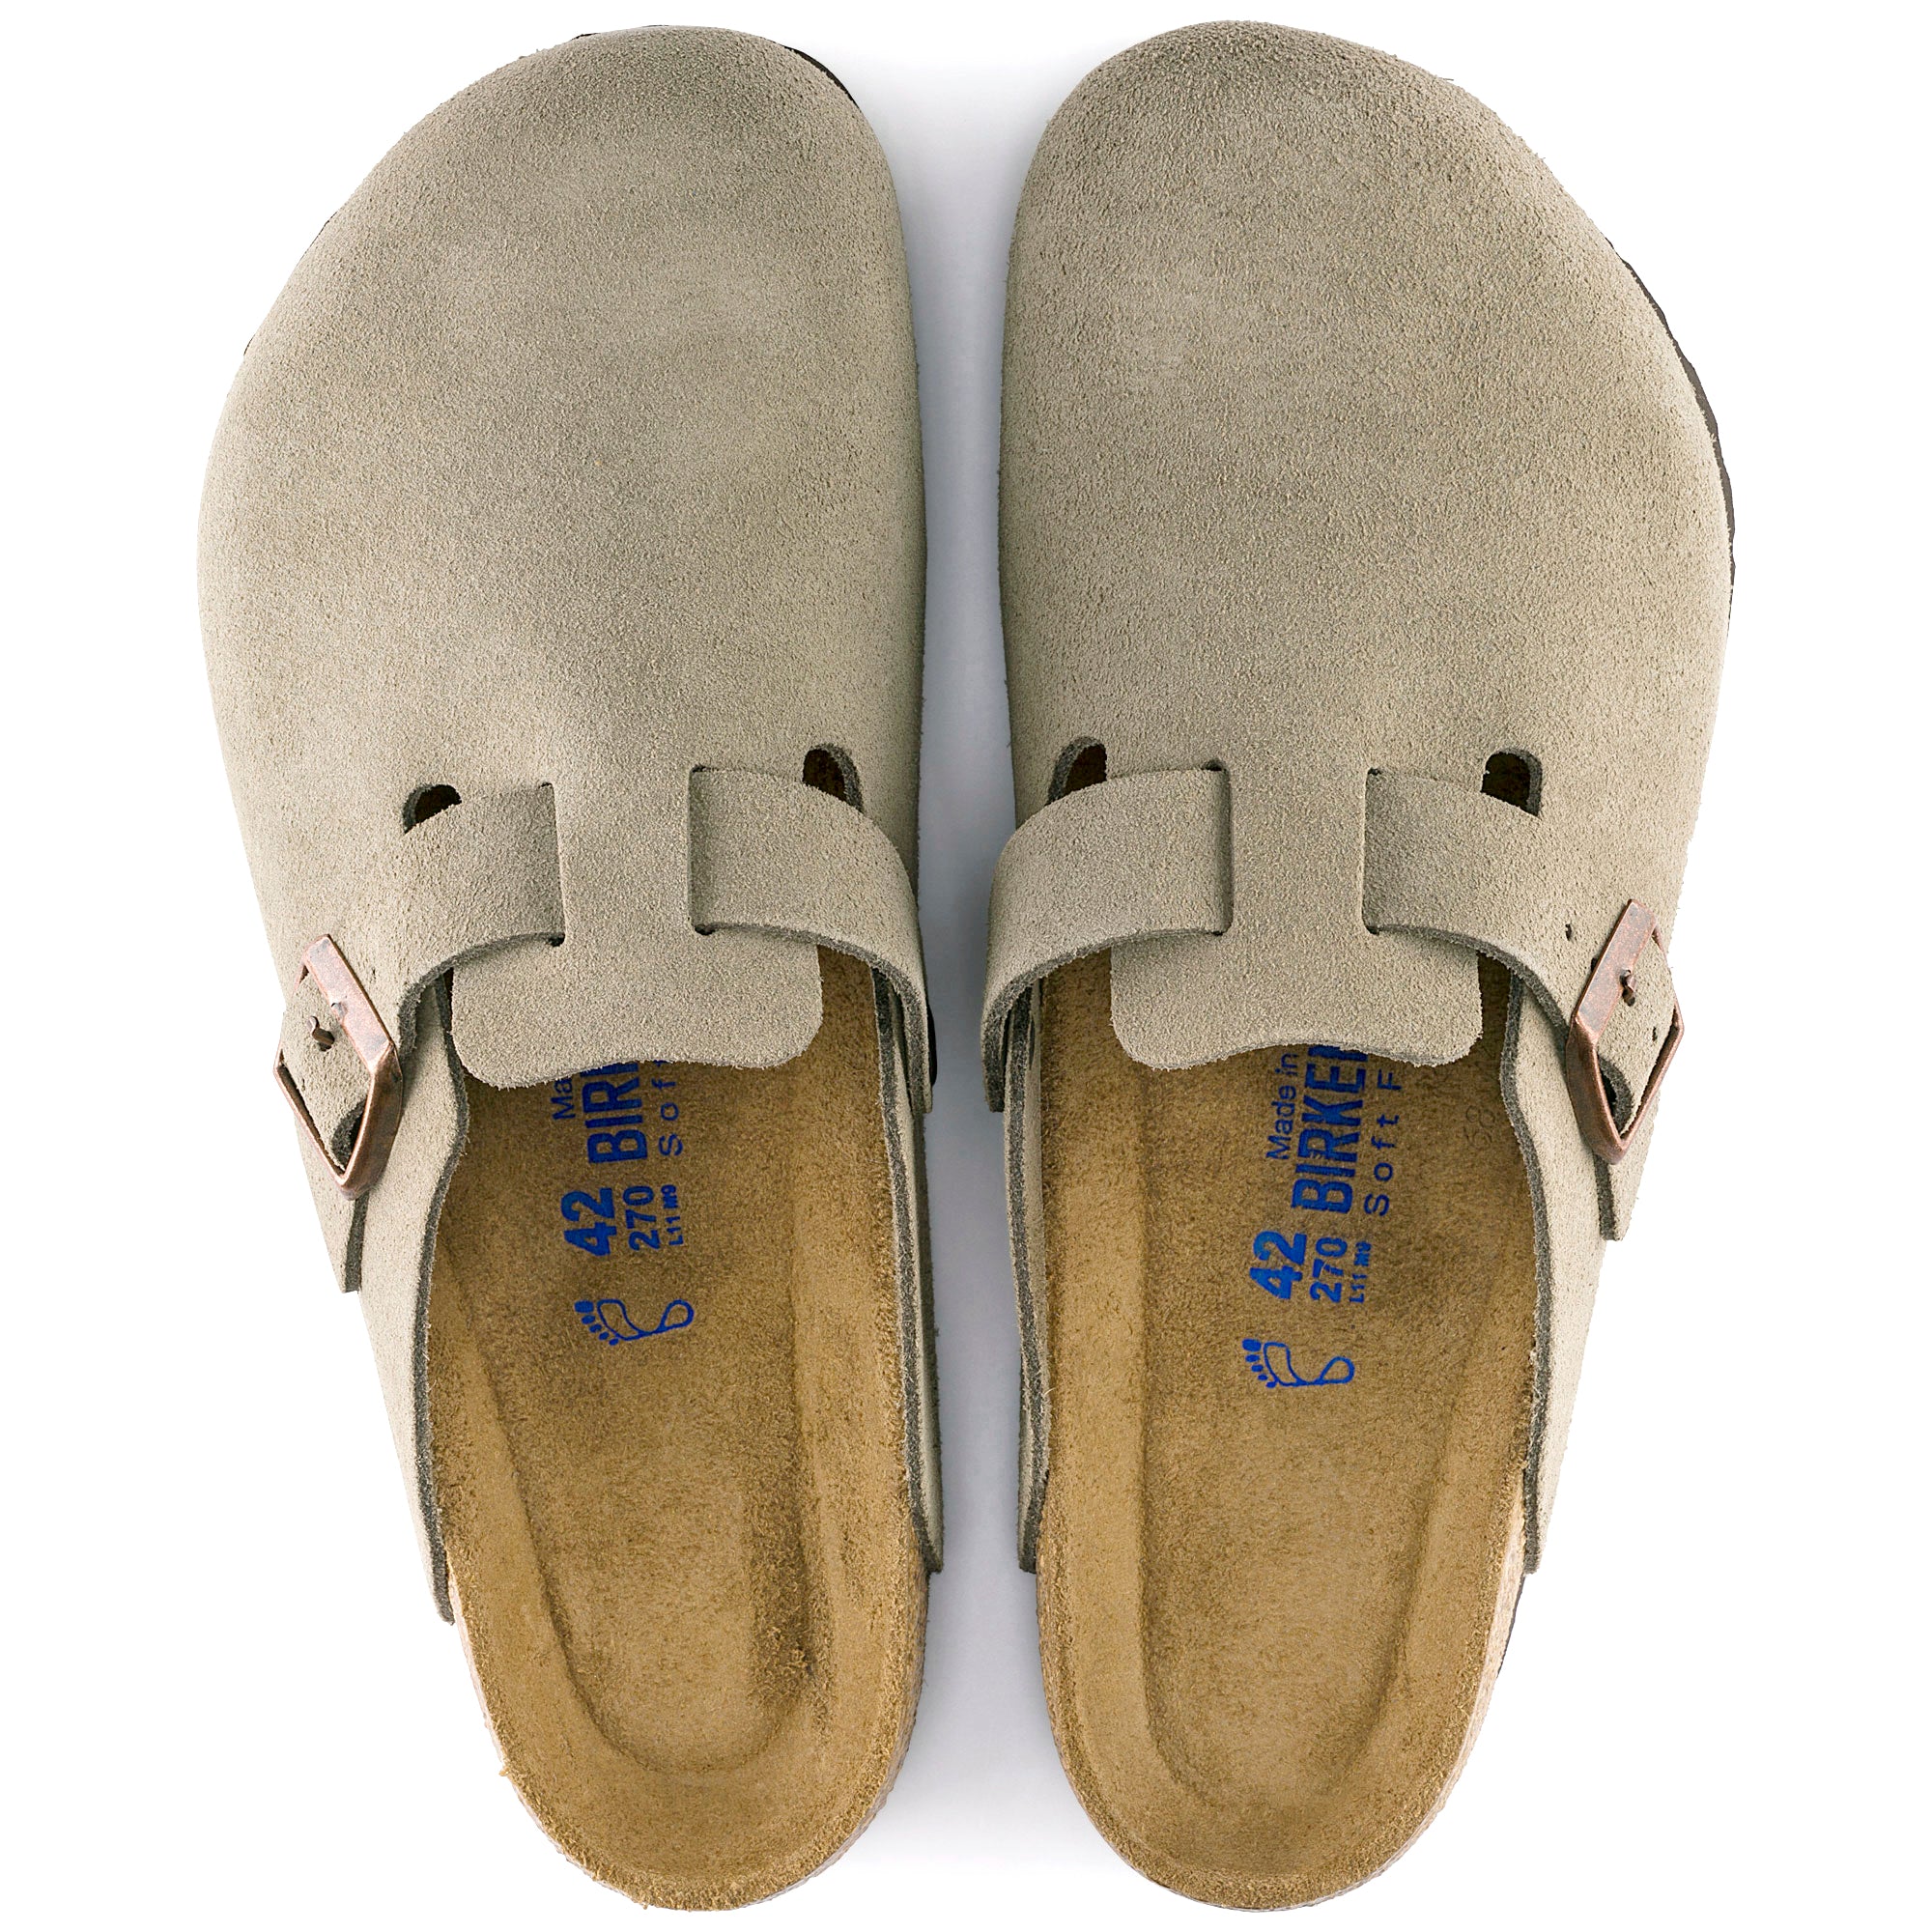 Boston Soft Footbed Suede Leather Taupe – Mackinac Birkenstock